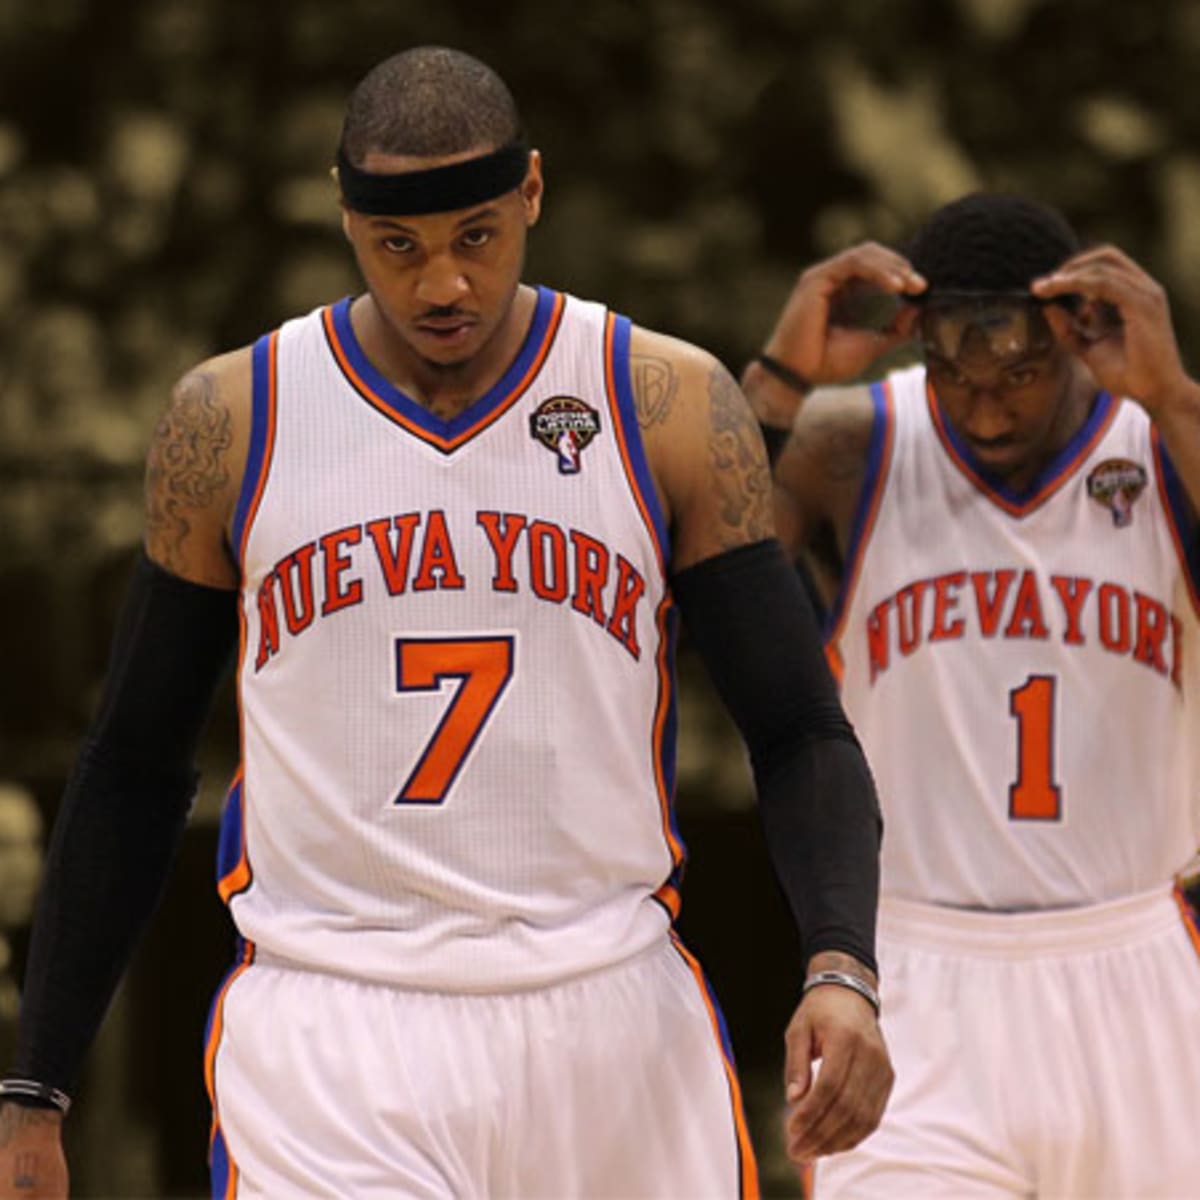 Amare Stoudemire – The Forward